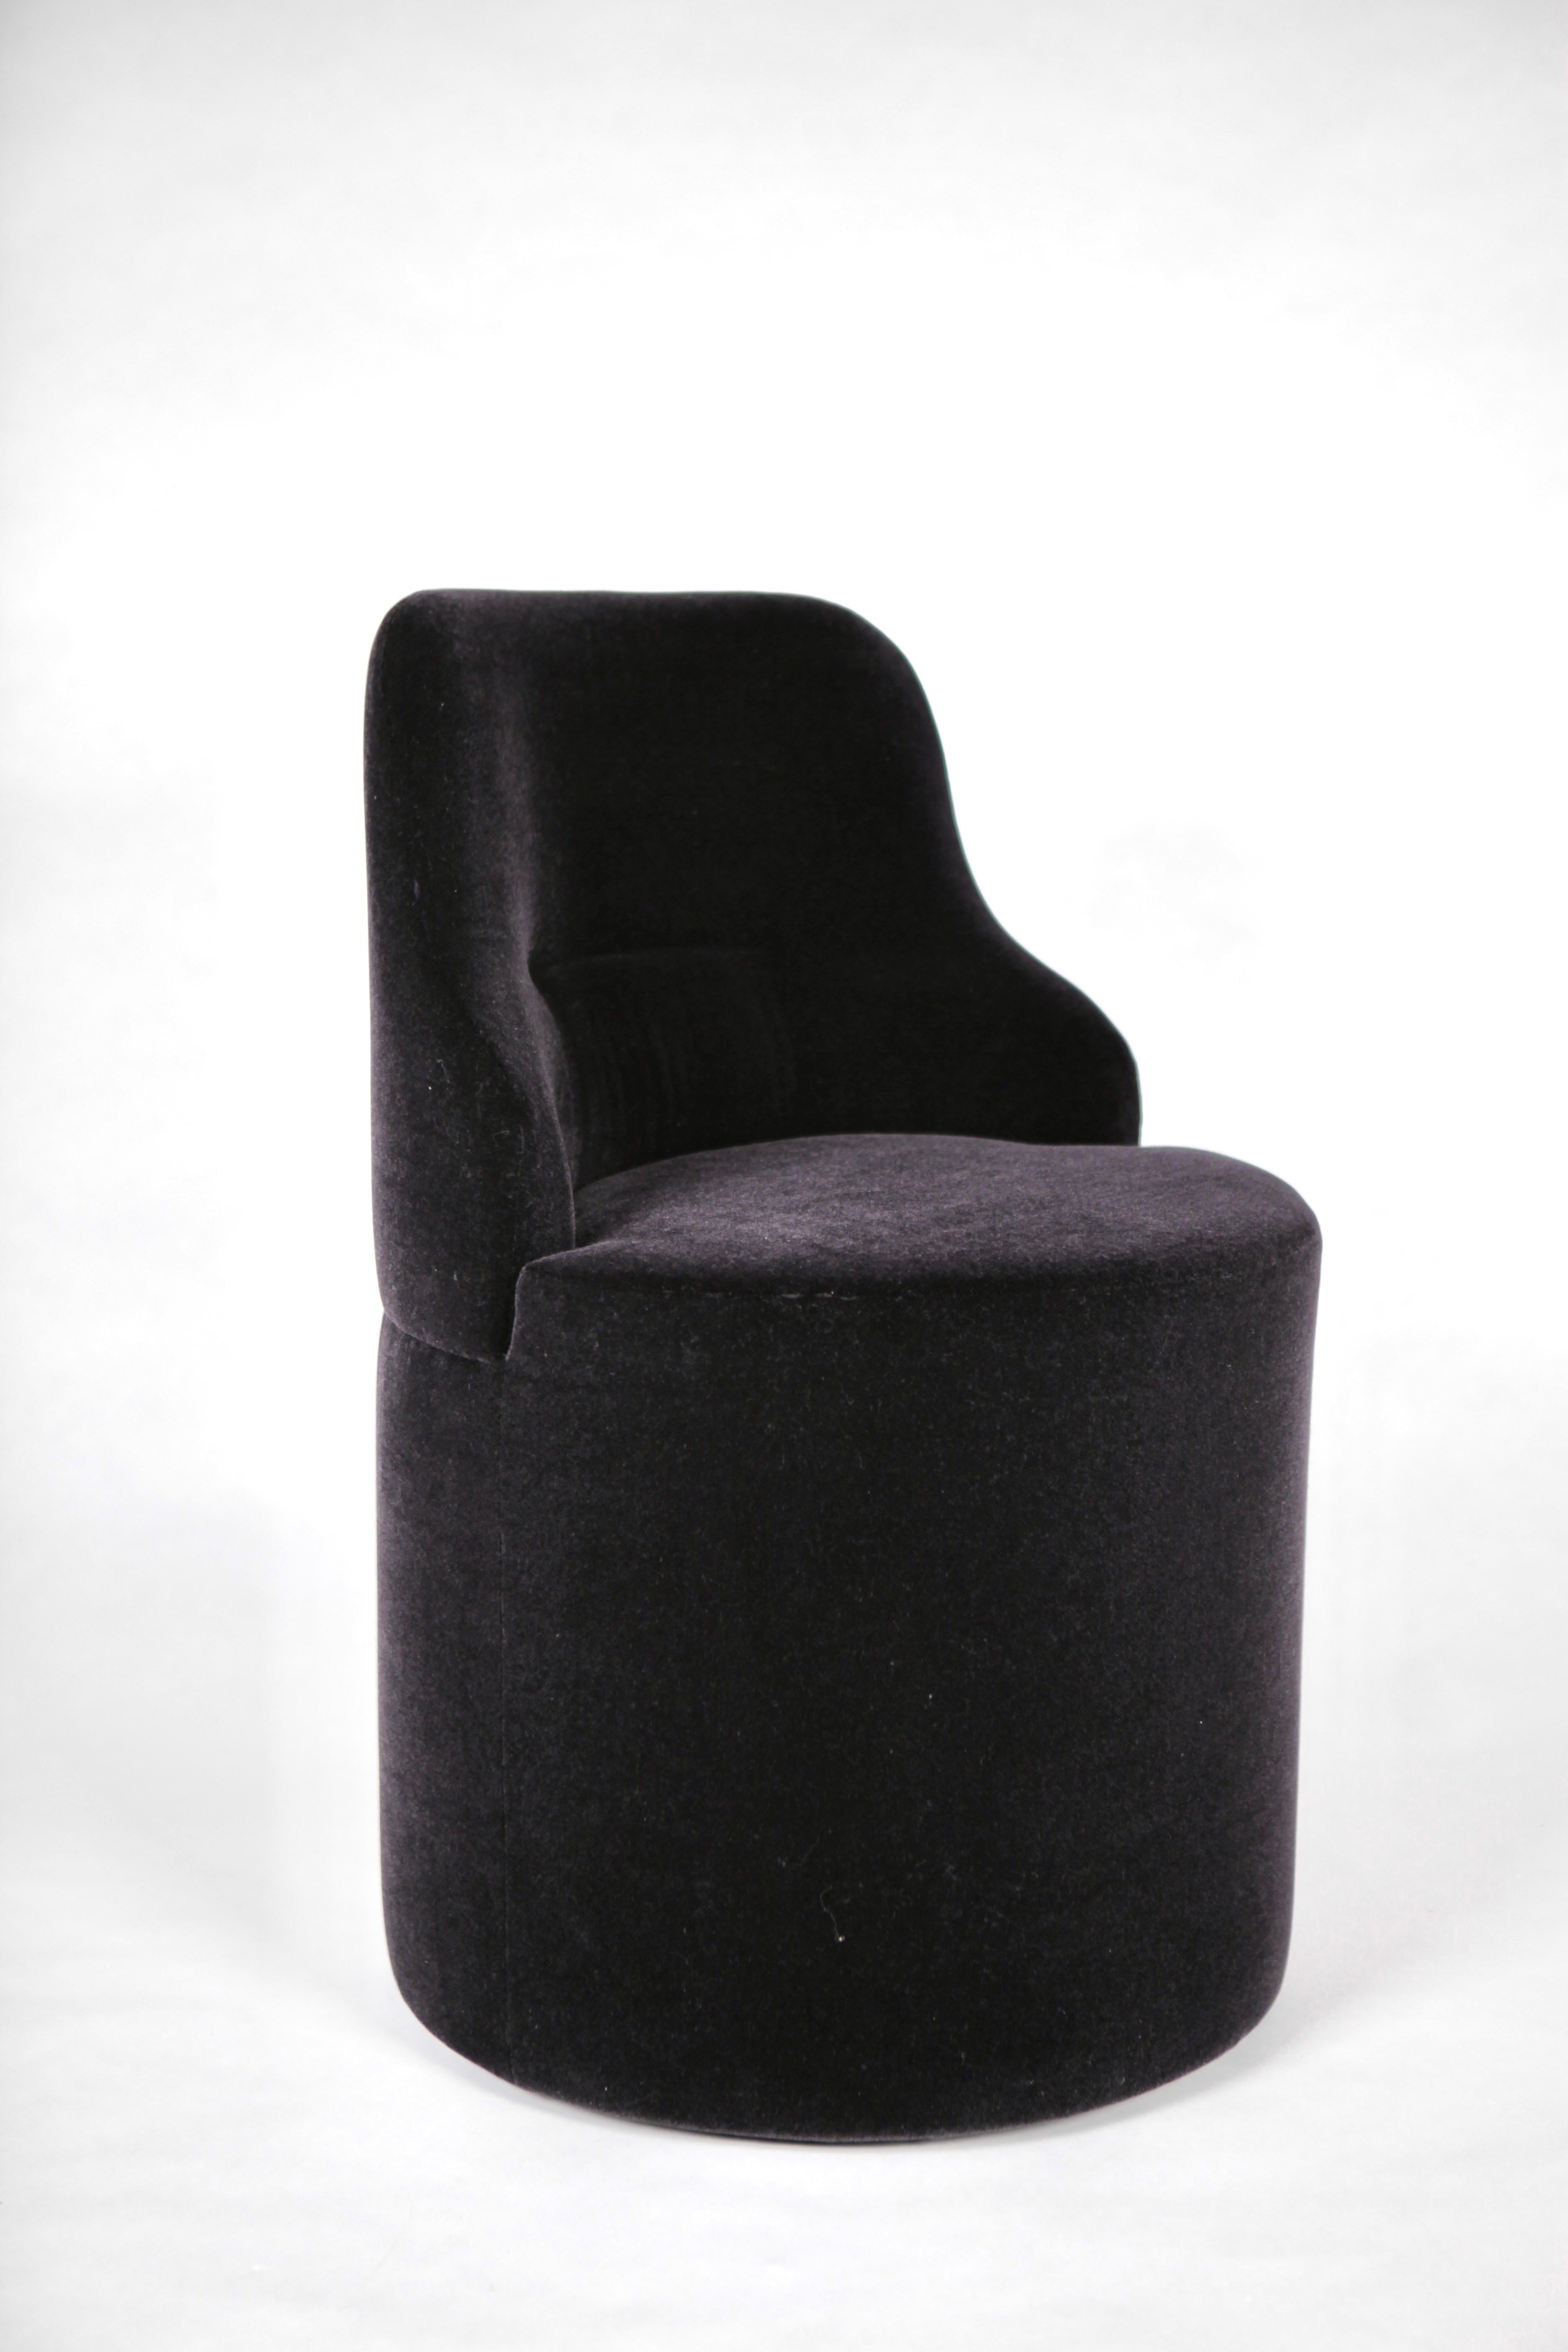 Luigi Caccia Dominioni, black mohair upholstered 'Manzoni' chair.
Edition Azucena.
Designed in 1975, Milano, Italy.
The chair is in excellent vintage condition.